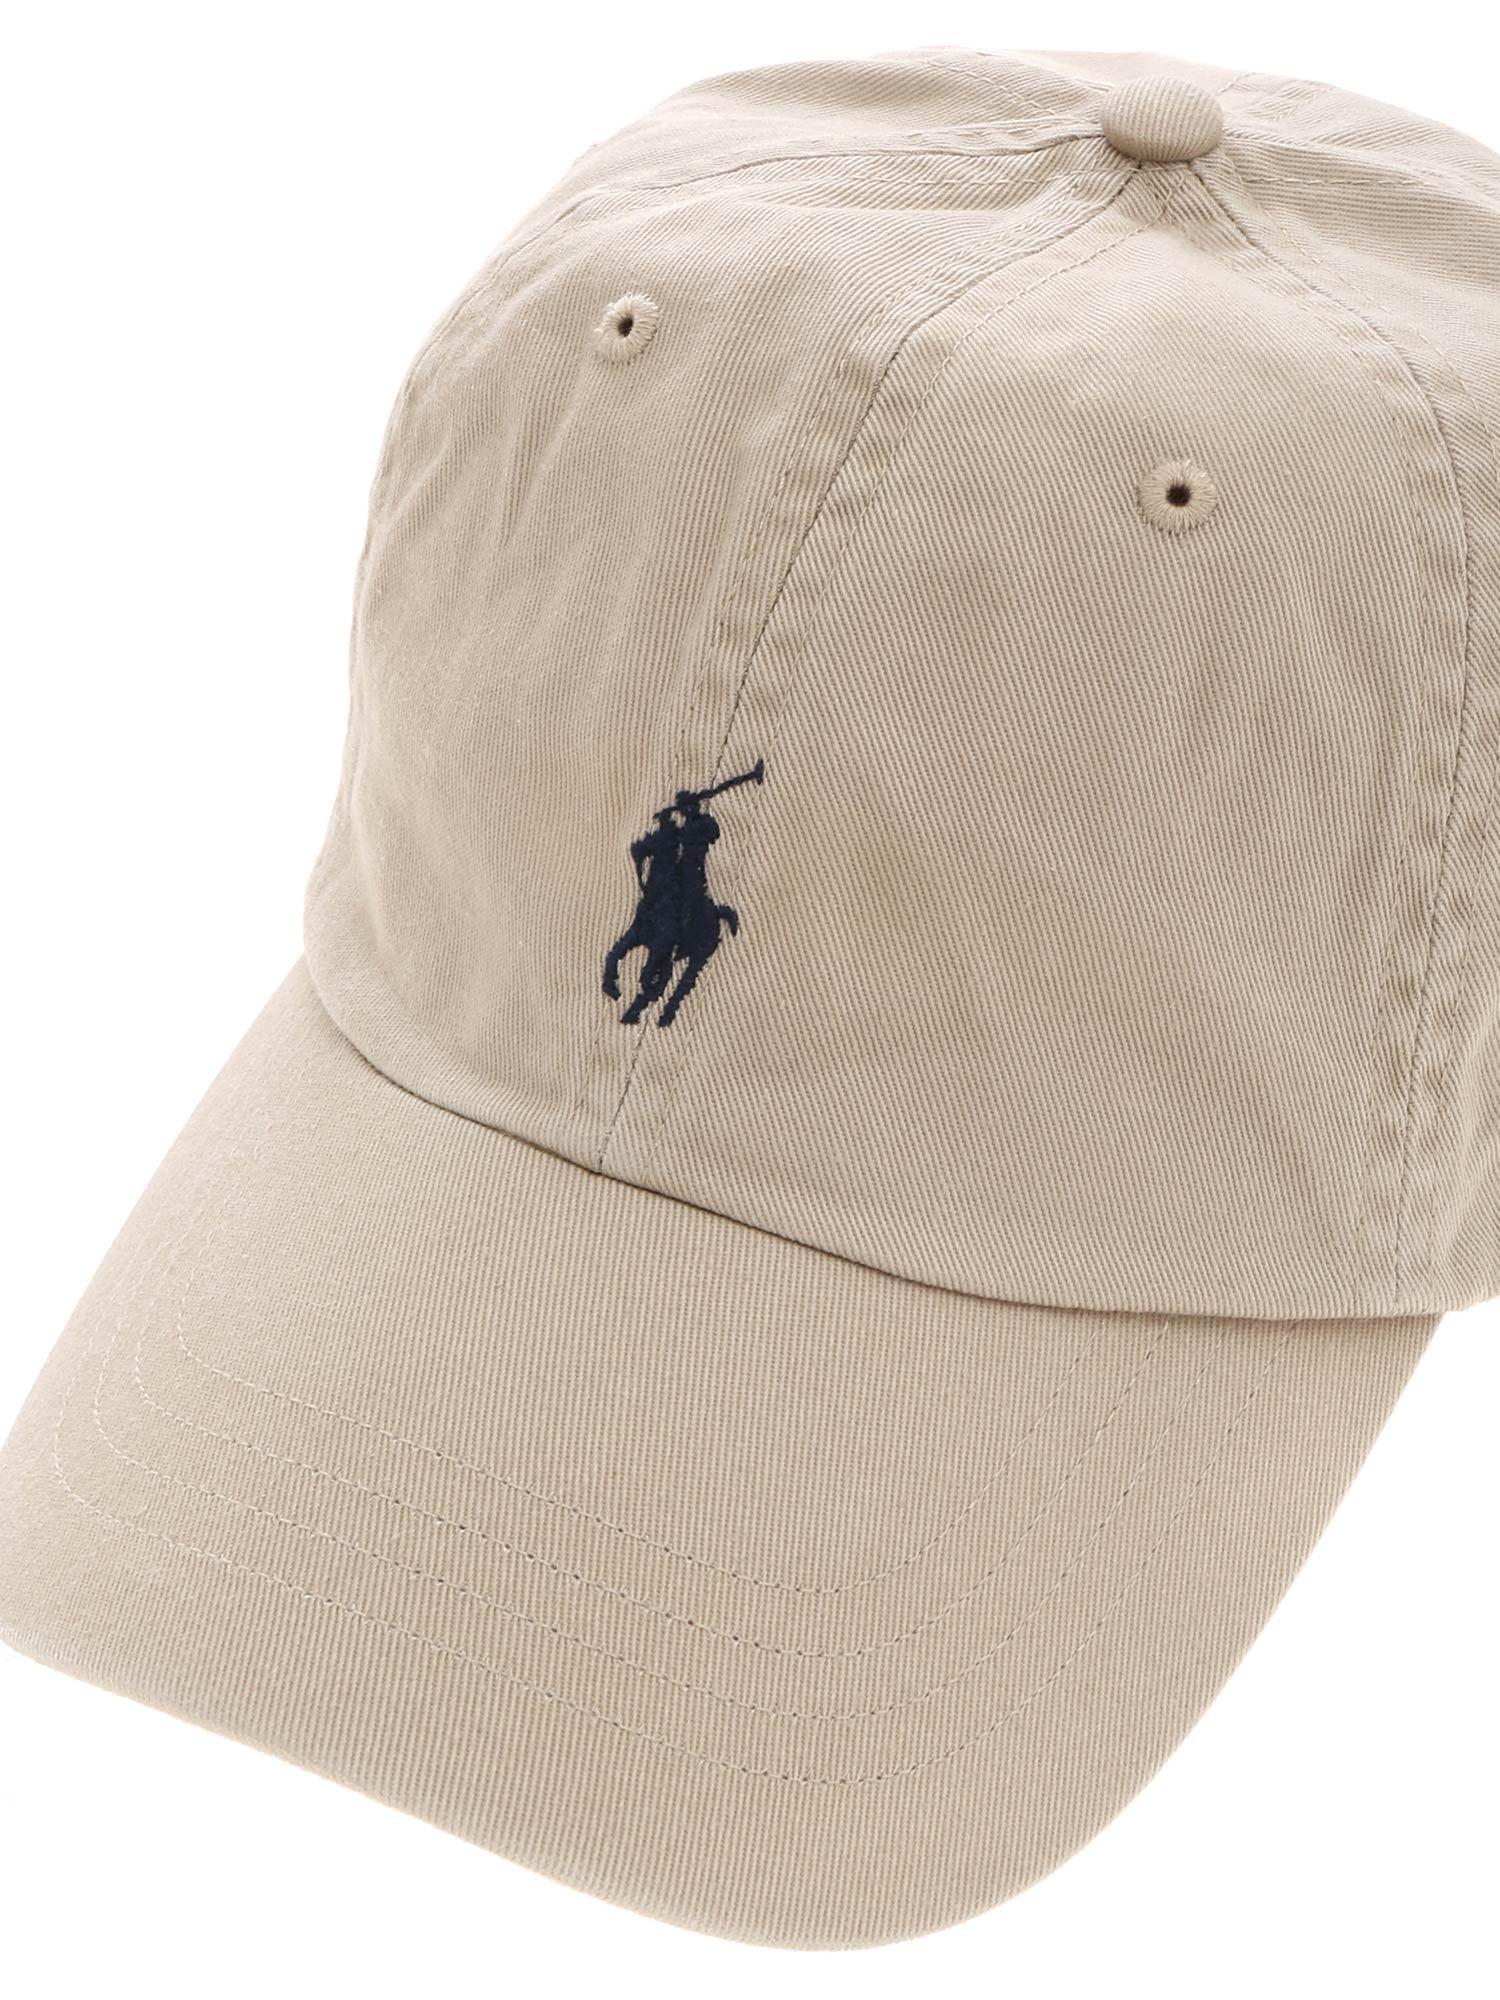 Polo Ralph Lauren Baseball Hat In Beige With Logo in Natural for Men - Lyst